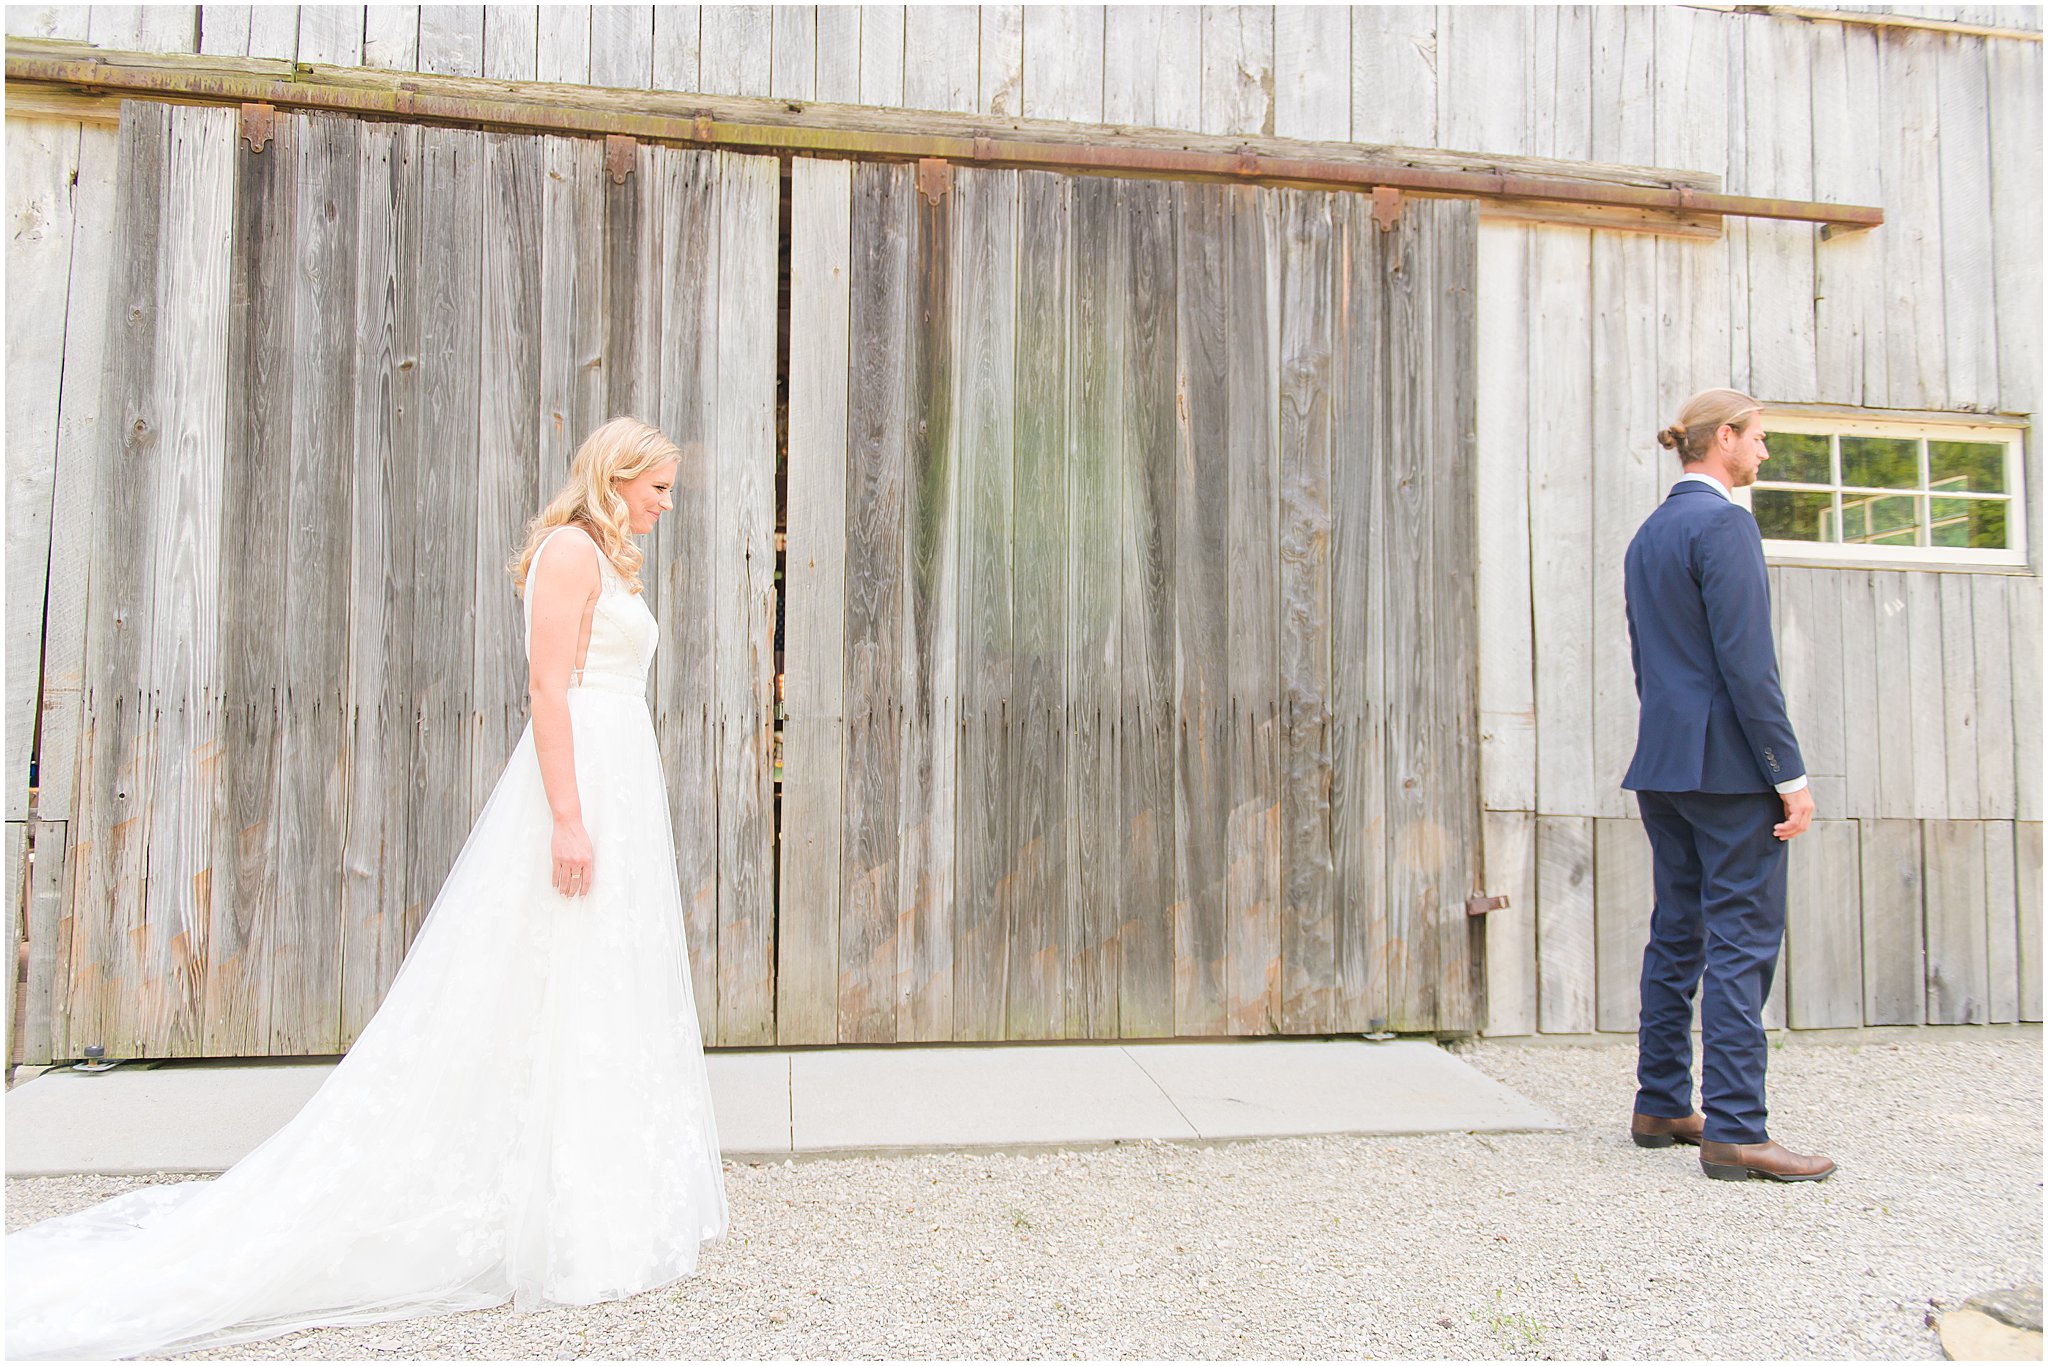 Bride and groom first look The Old Barn At Brown County wedding